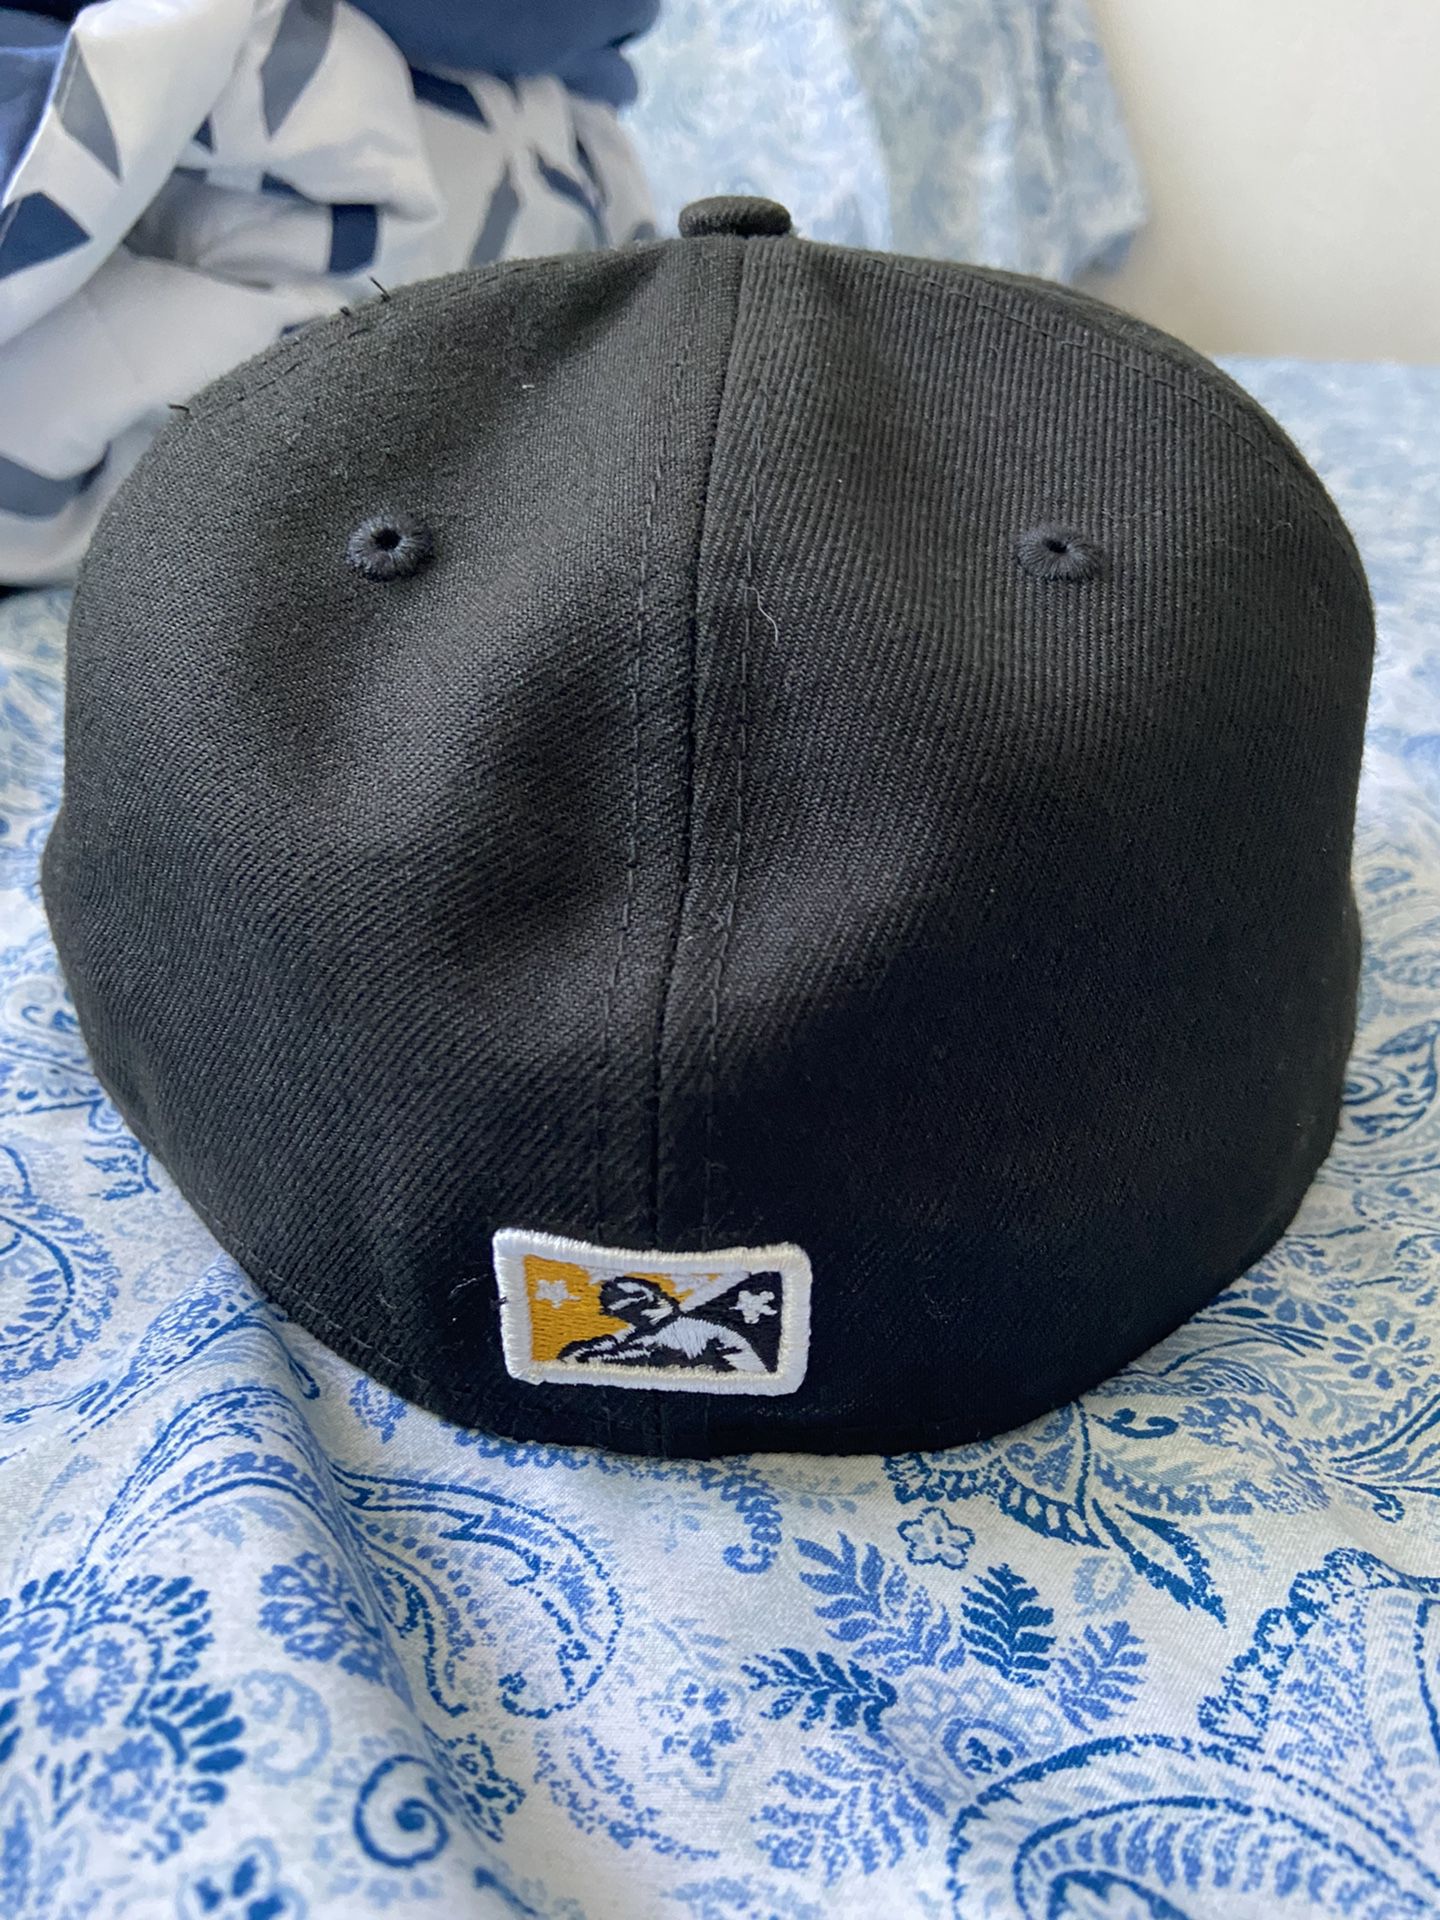 Salt Lake Bees Fitted Cap, Black Size 7 1/4 for Sale in San Diego